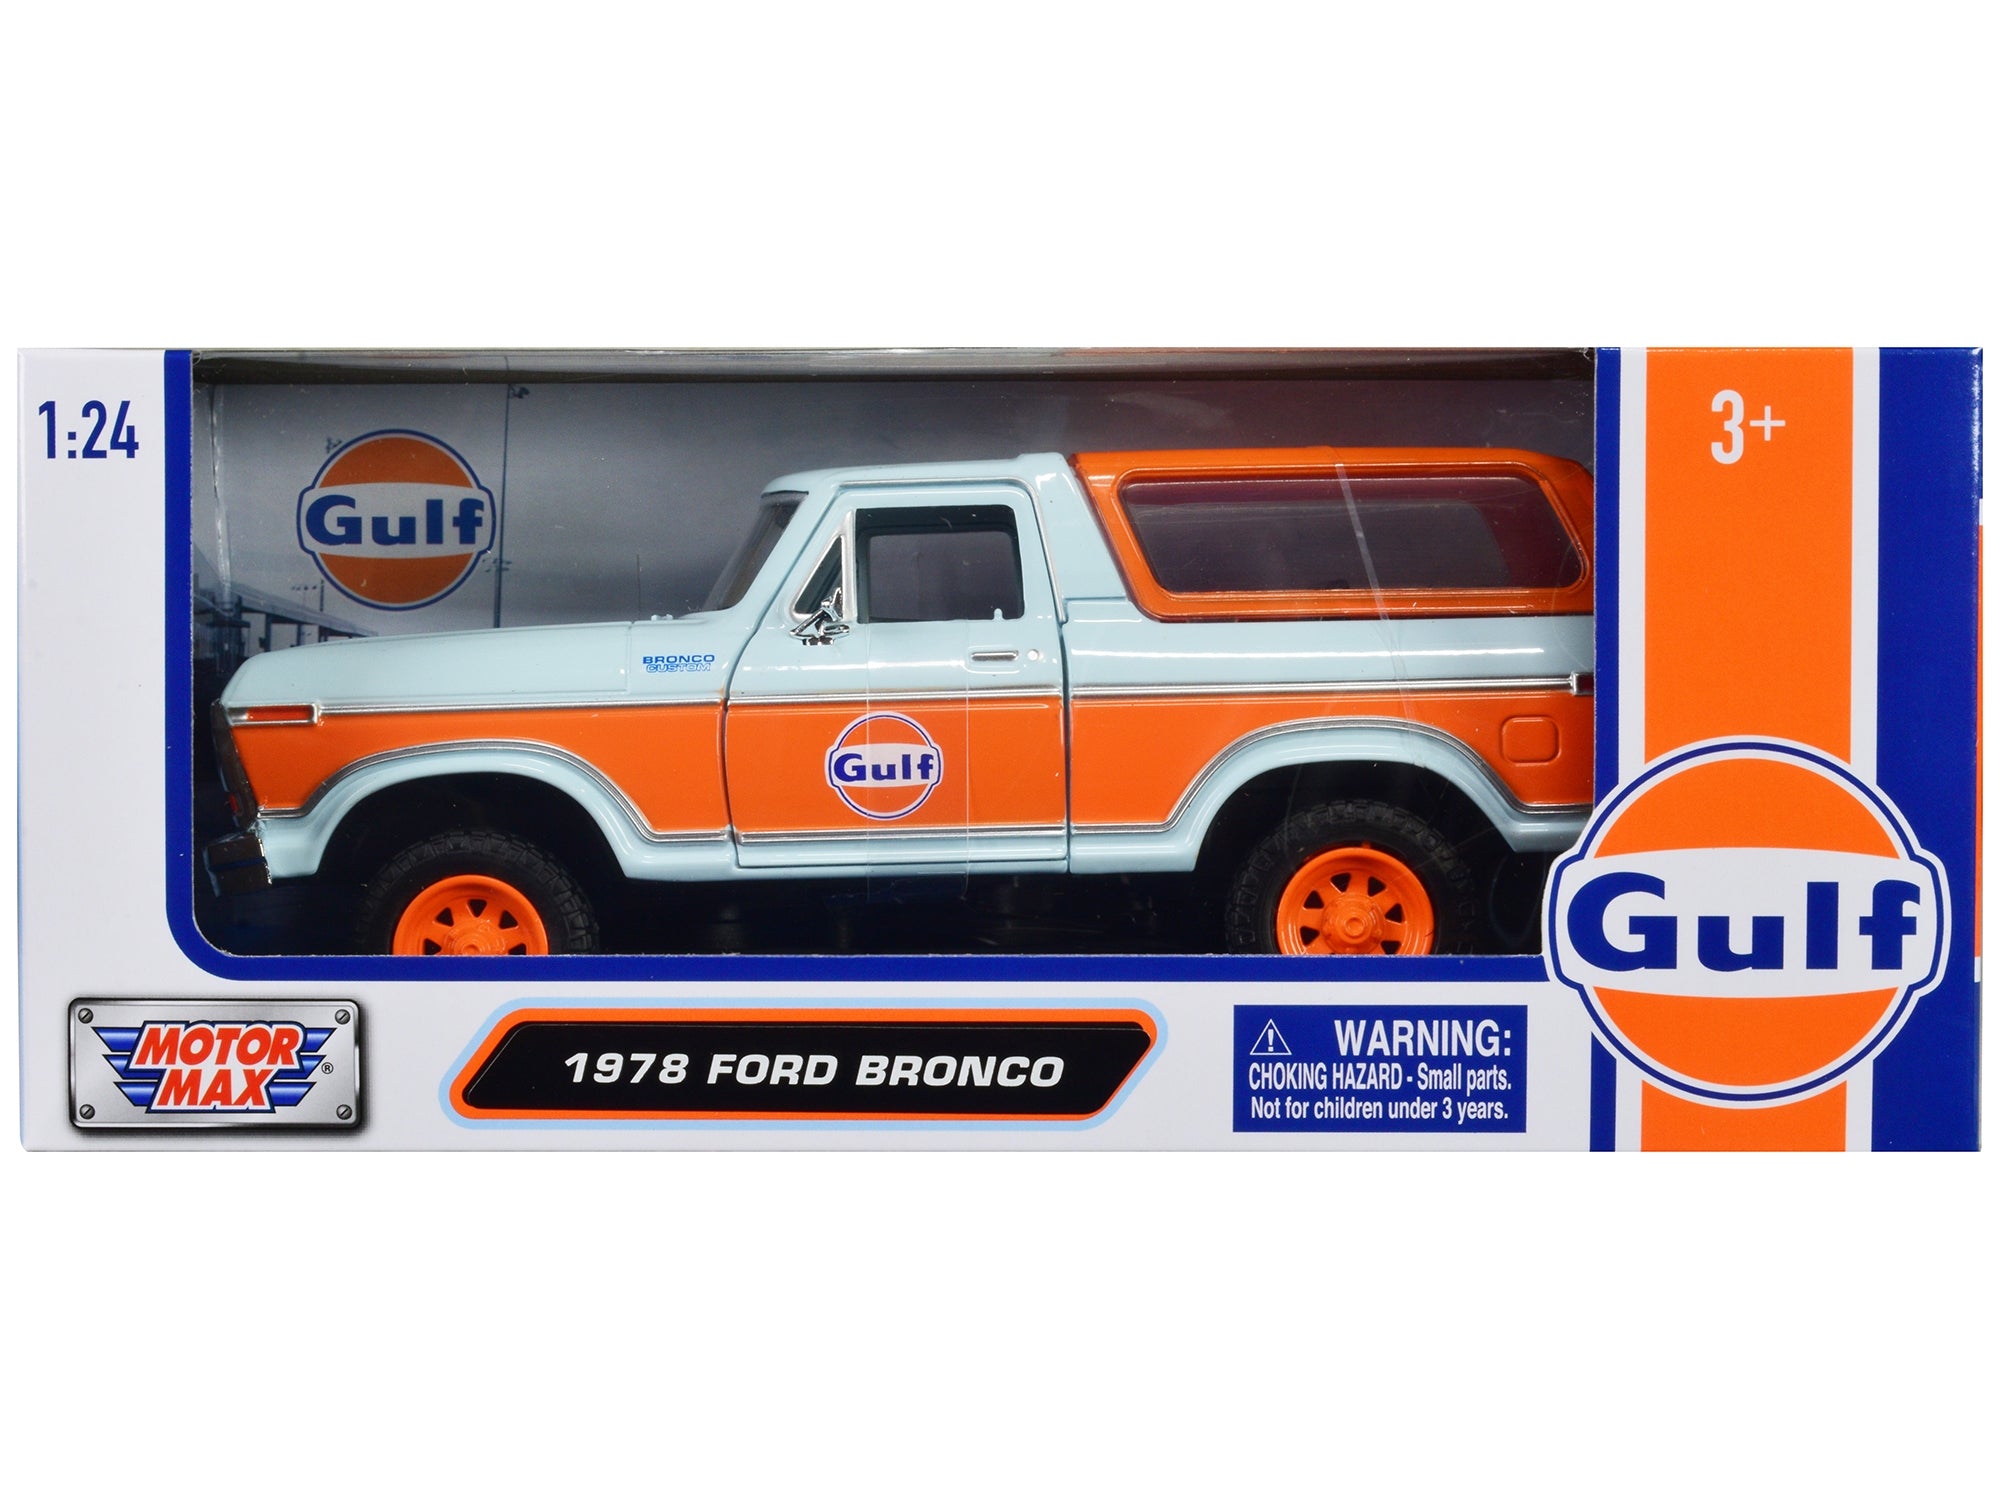 1978 Ford Bronco Light Blue and Orange "Gulf Oil" "Gulf Die-Cast Collection" 1/24 Diecast Model Car by Motormax Motormax